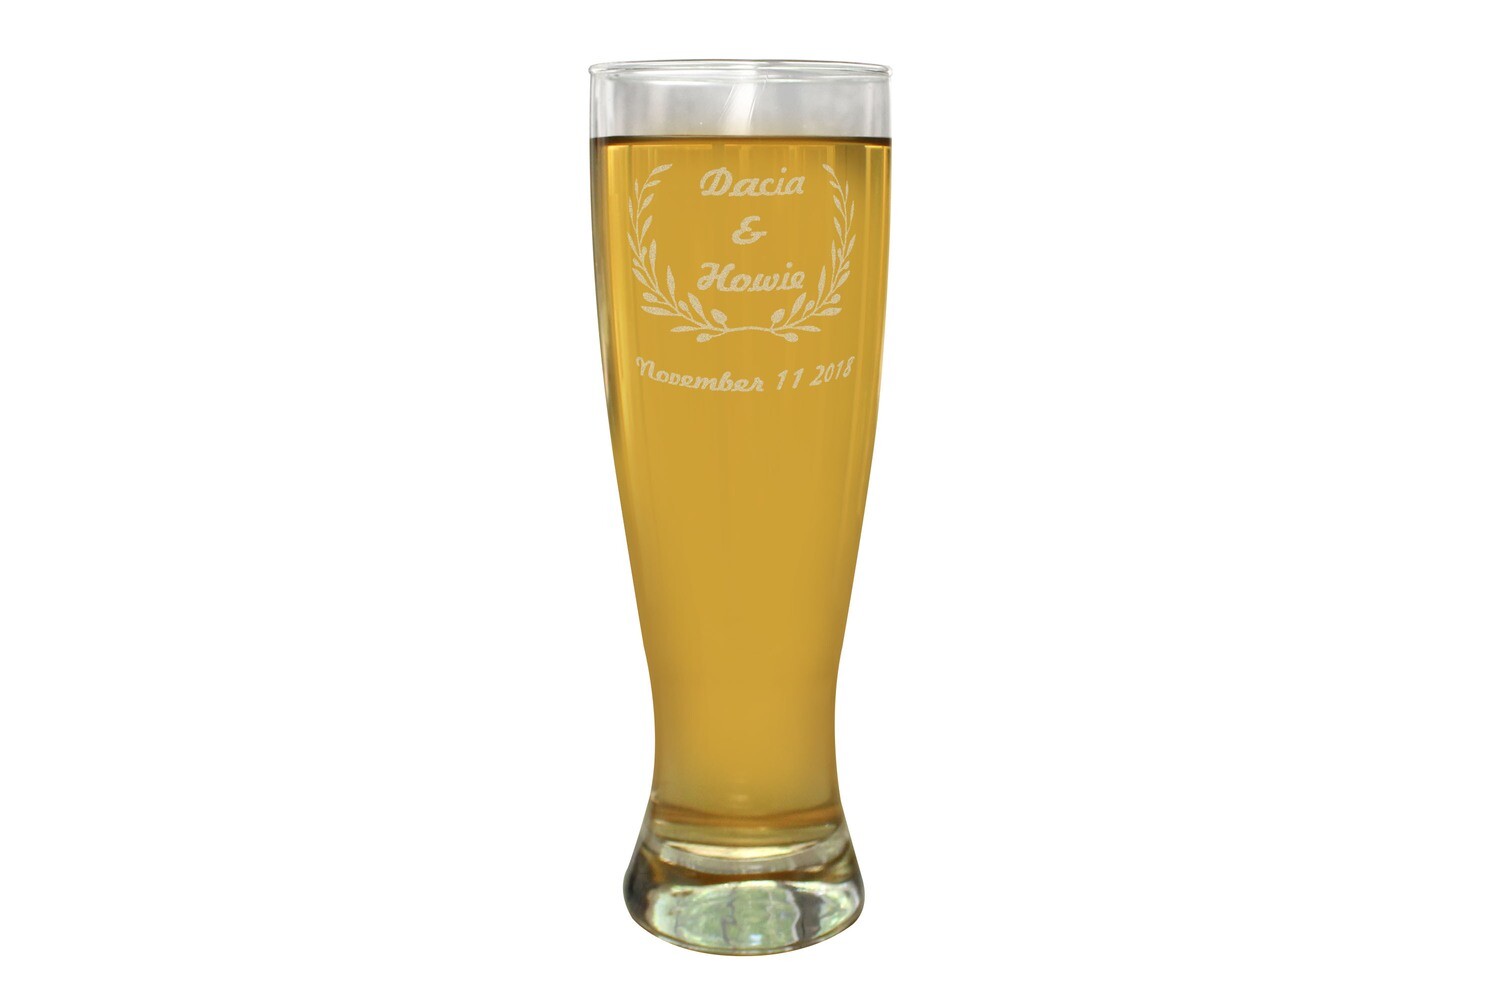 Wreath with Names & Dates Pilsner Beer Glass 16 oz